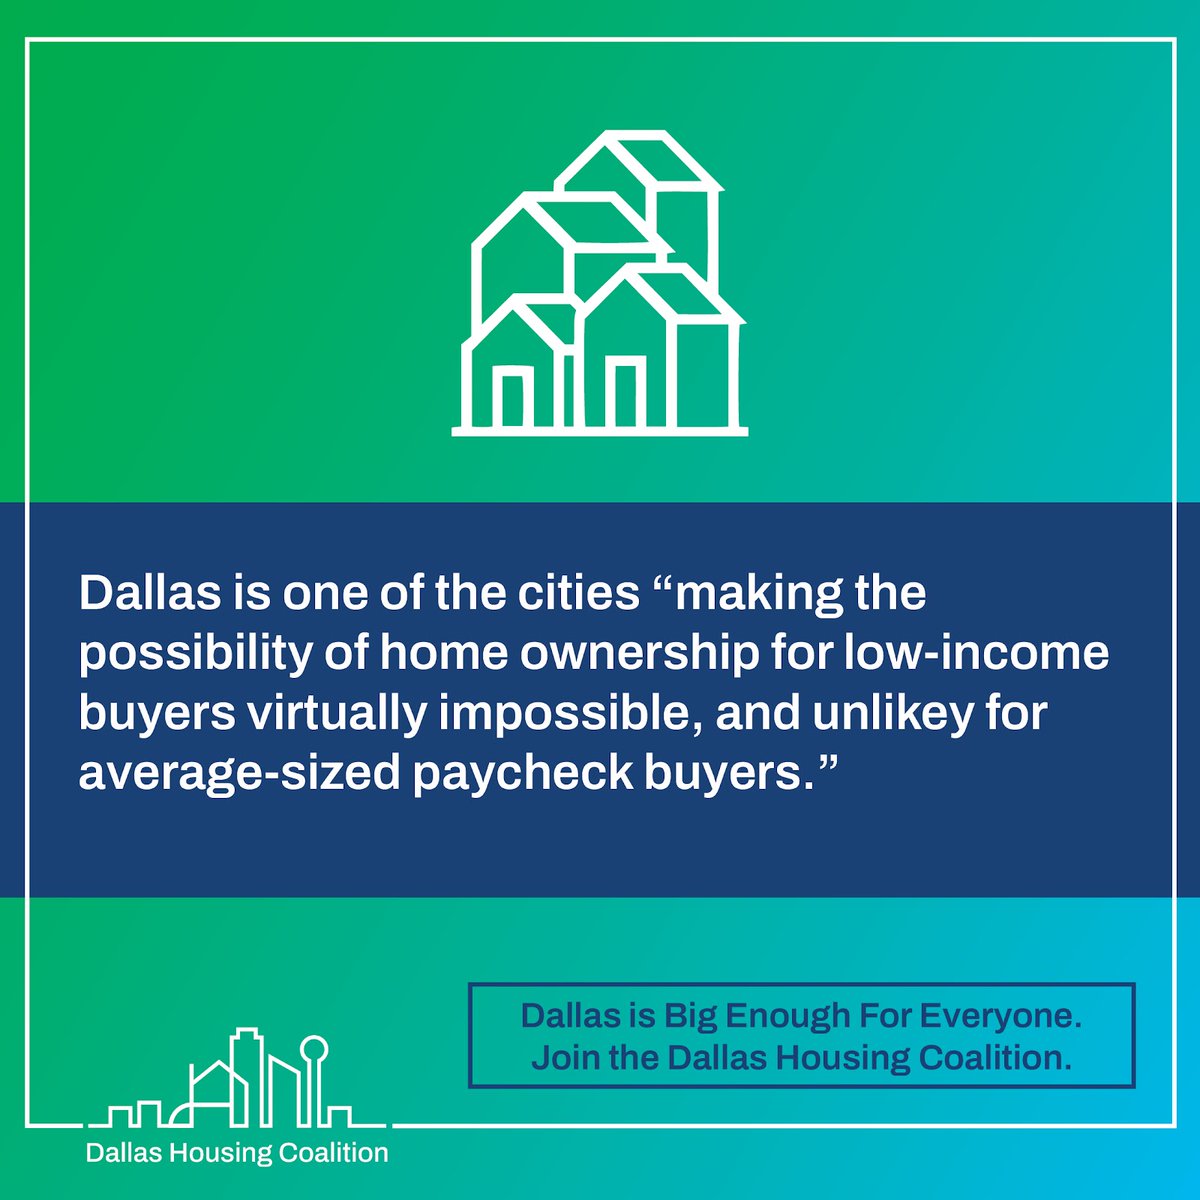 With soaring home prices and increased interest rates, Dallas homebuyers are facing the prospect of allocating over 41% of their income toward monthly mortgage. Dallas is now ranked among the least affordable cities for homeownership. #CityOfDallas bit.ly/3vyxzl3